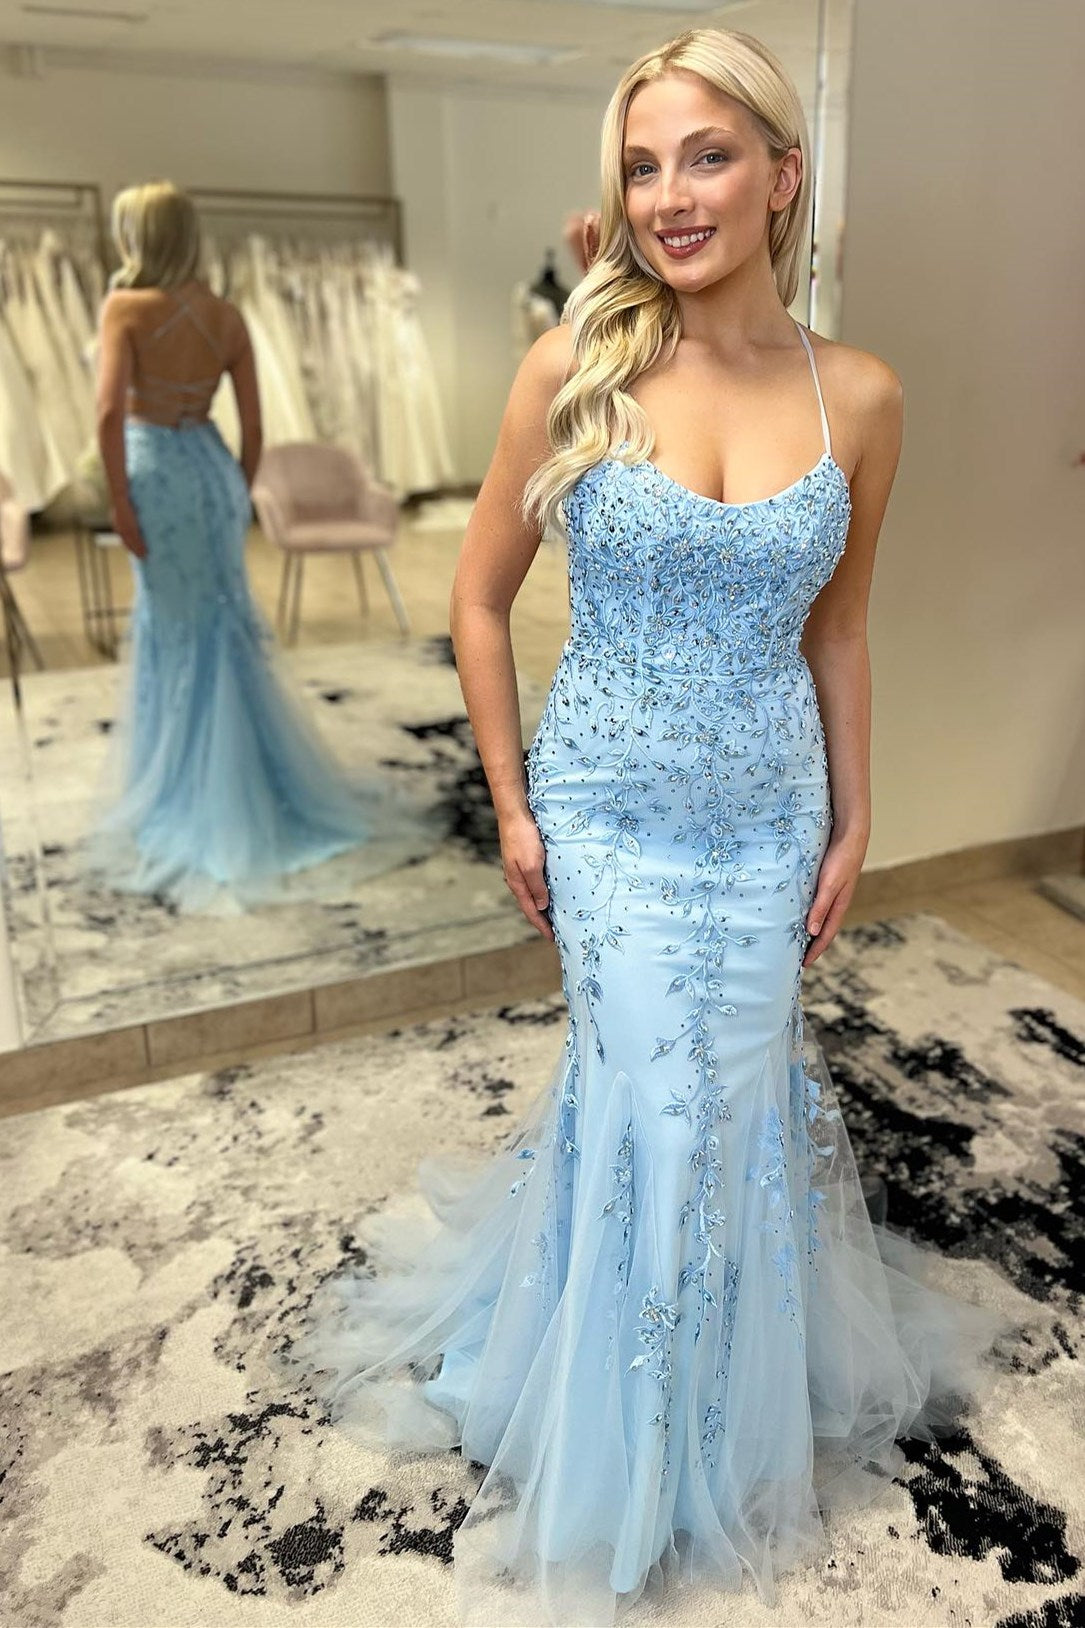 Harley |Mermaid Scoop Appliqued Prom Dress with Lace up Back